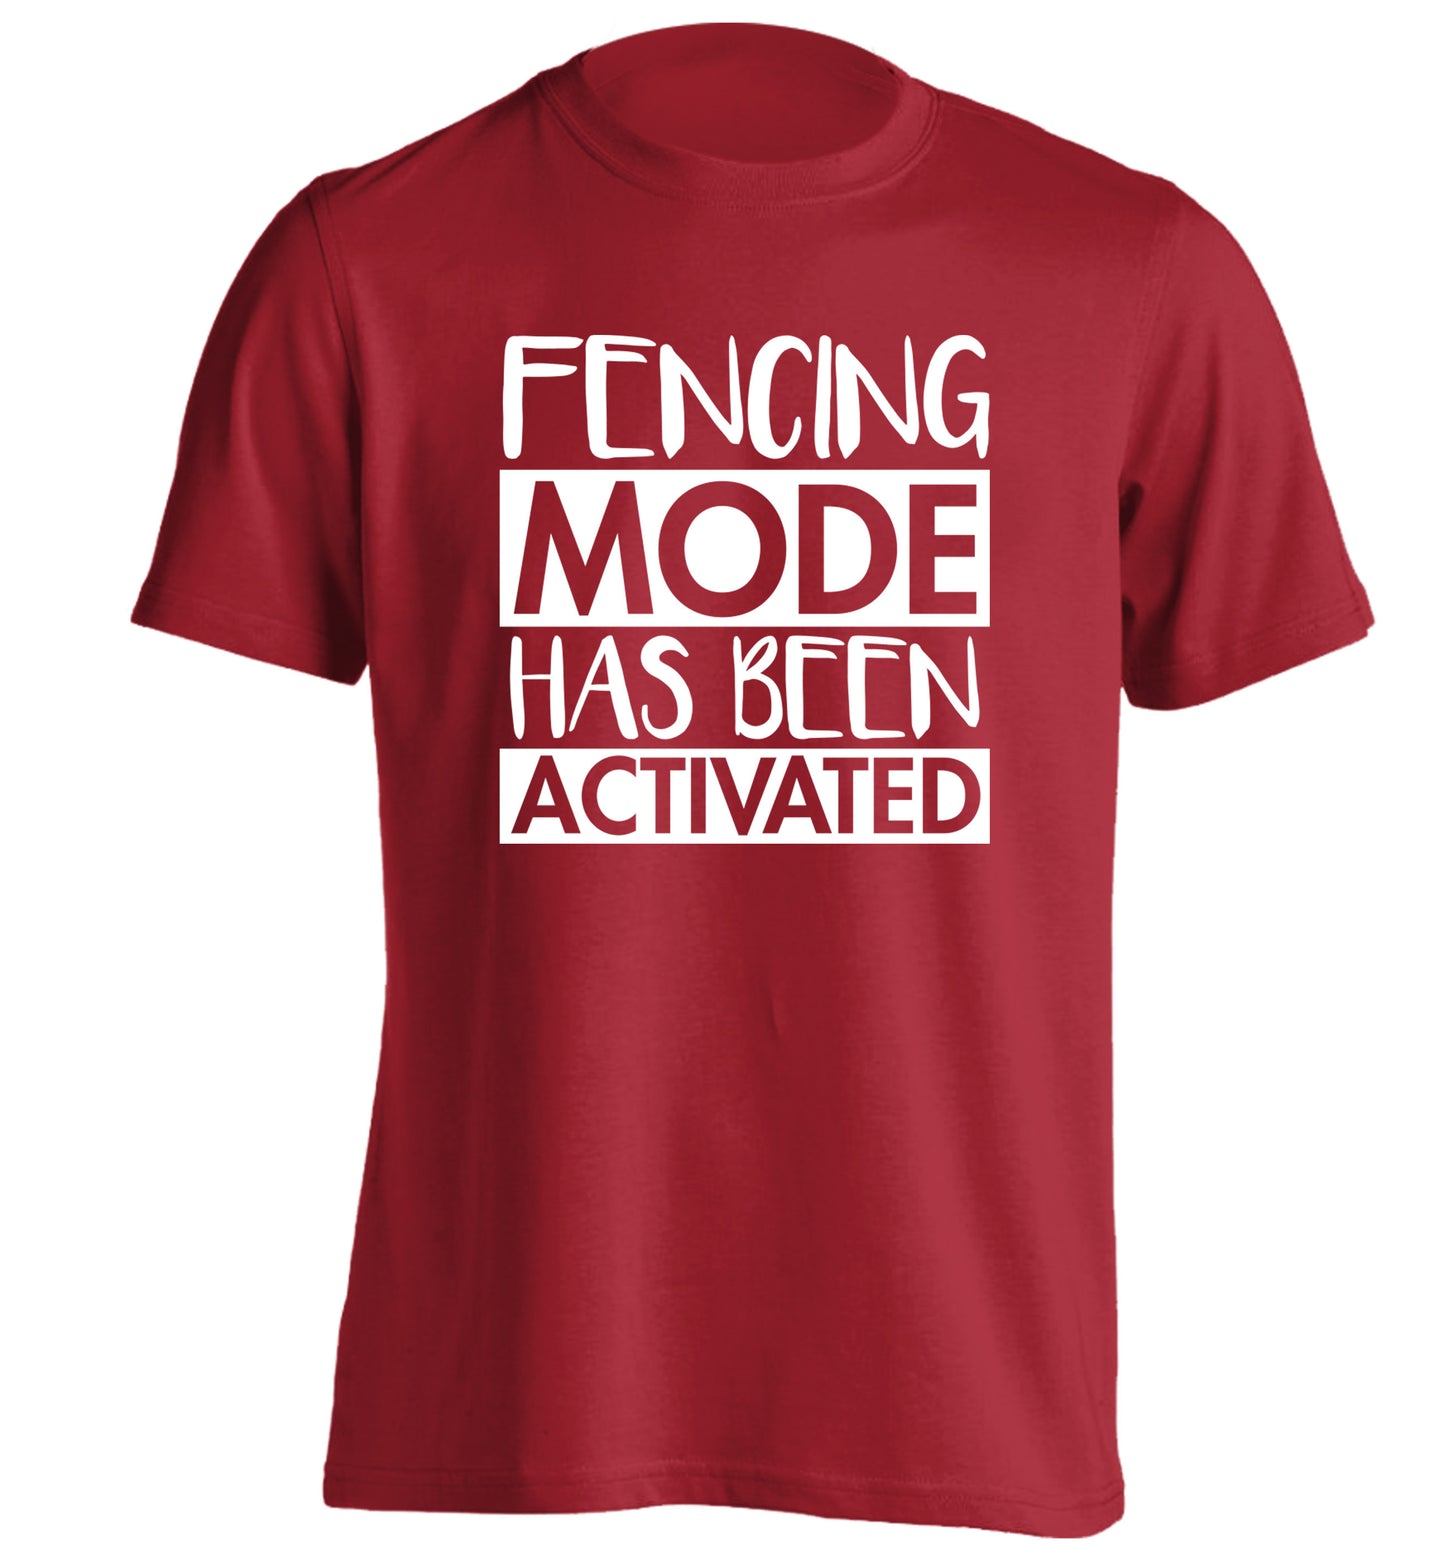 Fencing mode activated adults unisex red Tshirt 2XL